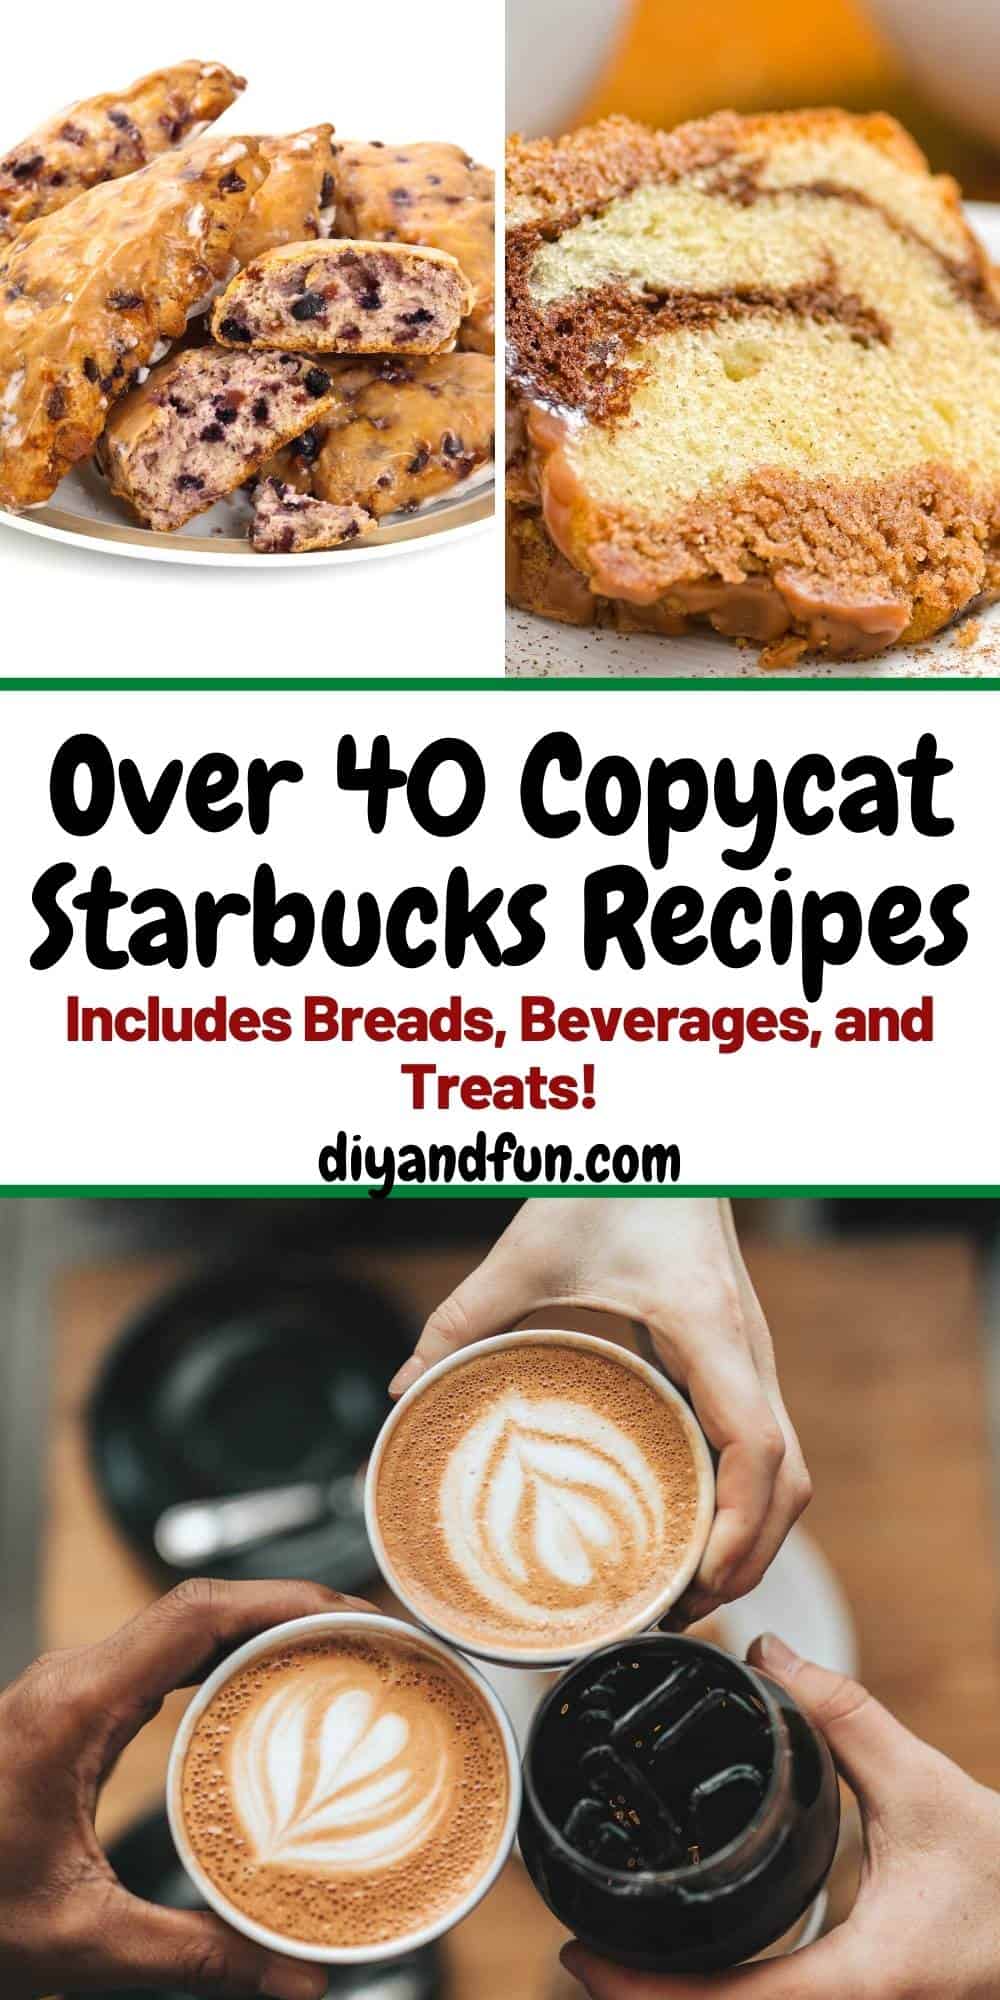 Over 40 Copycat Starbucks Recipes, the ultimate listing of inspired recipes, includes beverages, breads, and treats.